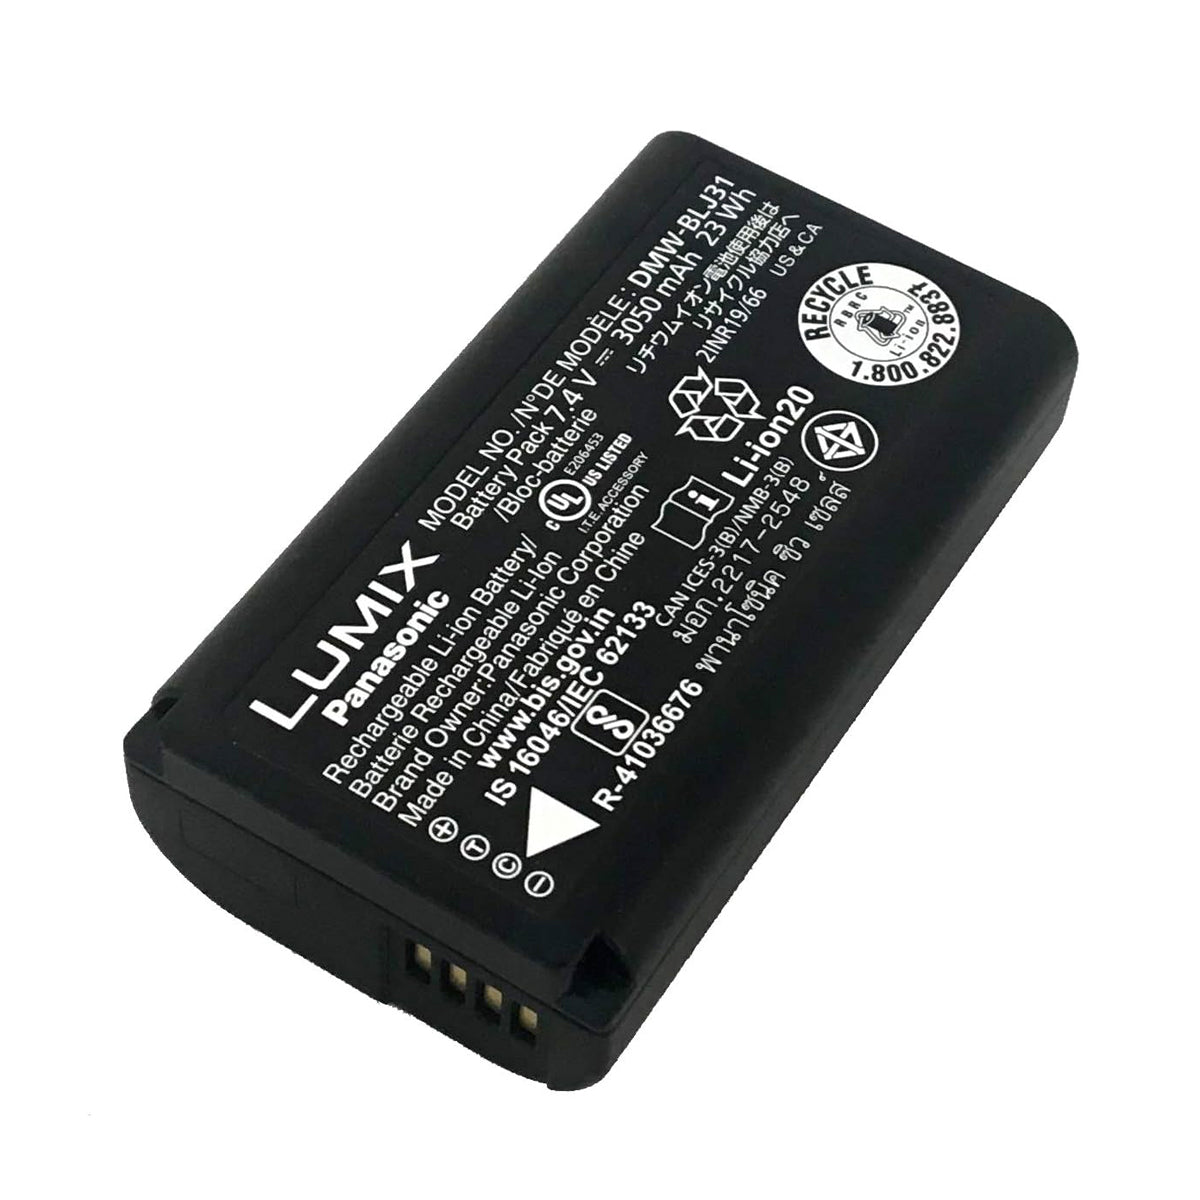 Rechargeable Lithium-Ion Battery - DMW-BLJ31